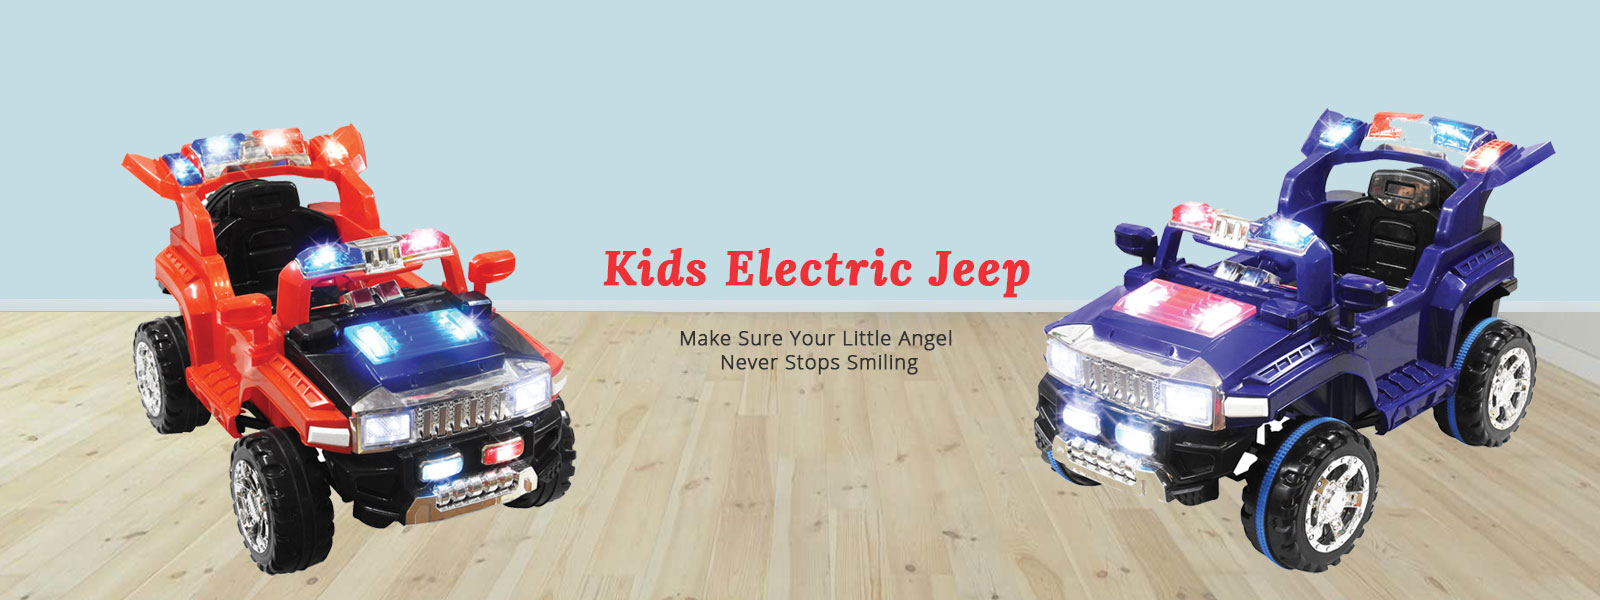 Kids Electric Jeep Manufacturers in Surat